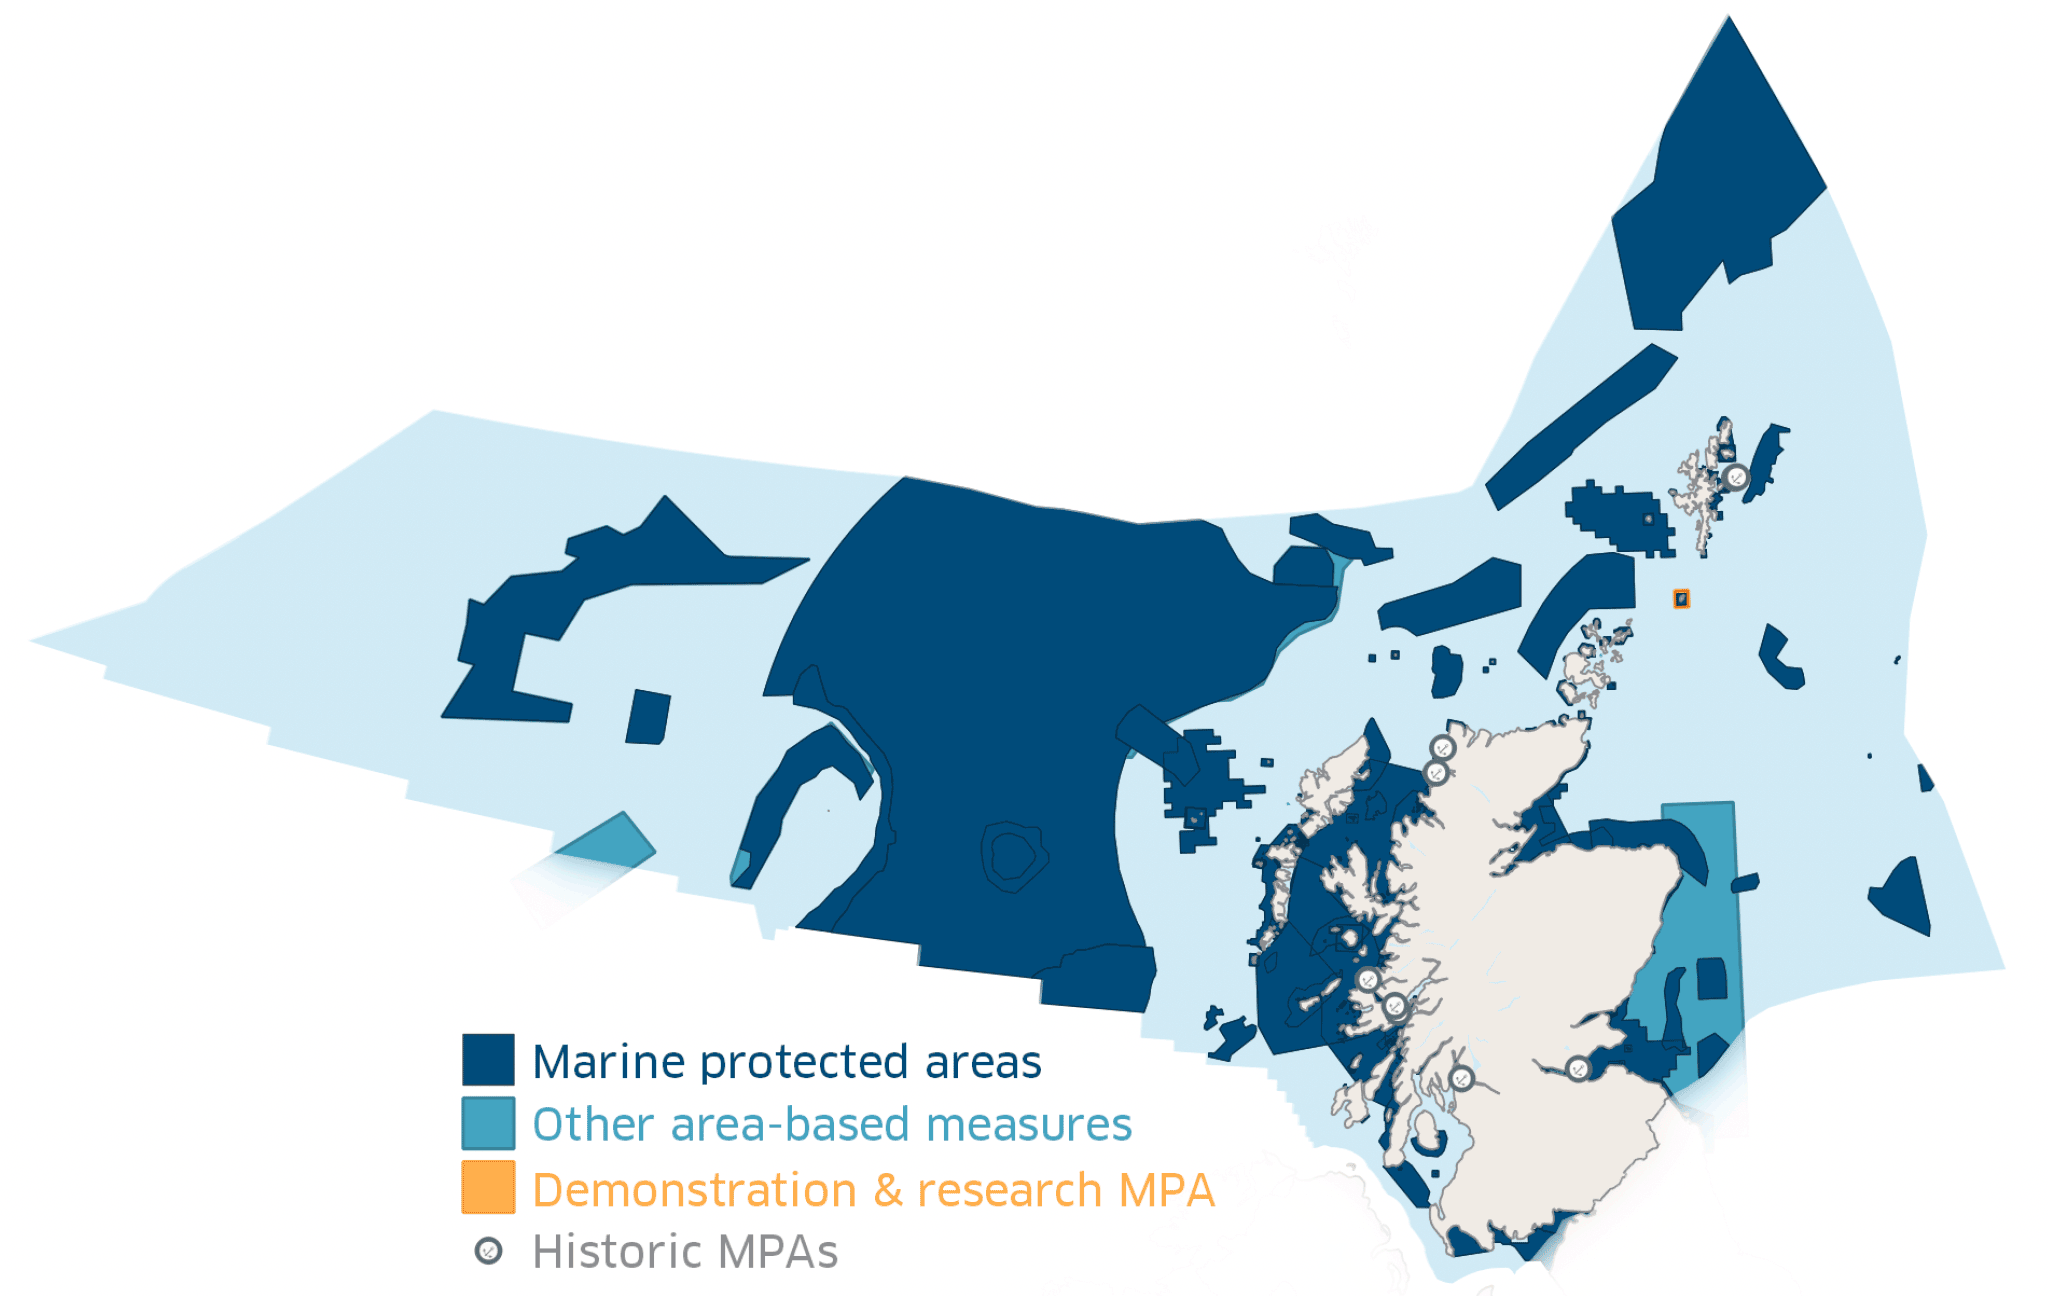 A map of Scotland and its waters with Marine Protected Area network visible by different shaded colours to differentiate between each type of MPA. 
The key identifies 4 things:
Marine Protected Areas in dark blue which include inshore and offshore MPAs of various sizes dotted all around the costline of Scotland and it’s islands as well as offshore to the north, east and west. 
Other area based measures that contribute to the network but are not MPAs are shaded in light blue and sit of the east coast and offshore to north and west. 
Demonstration & research MPA which sits between Shetland & Orkney 
And historic MPAs which are mainly dotted along the west coast with one situated on the east coast. 
